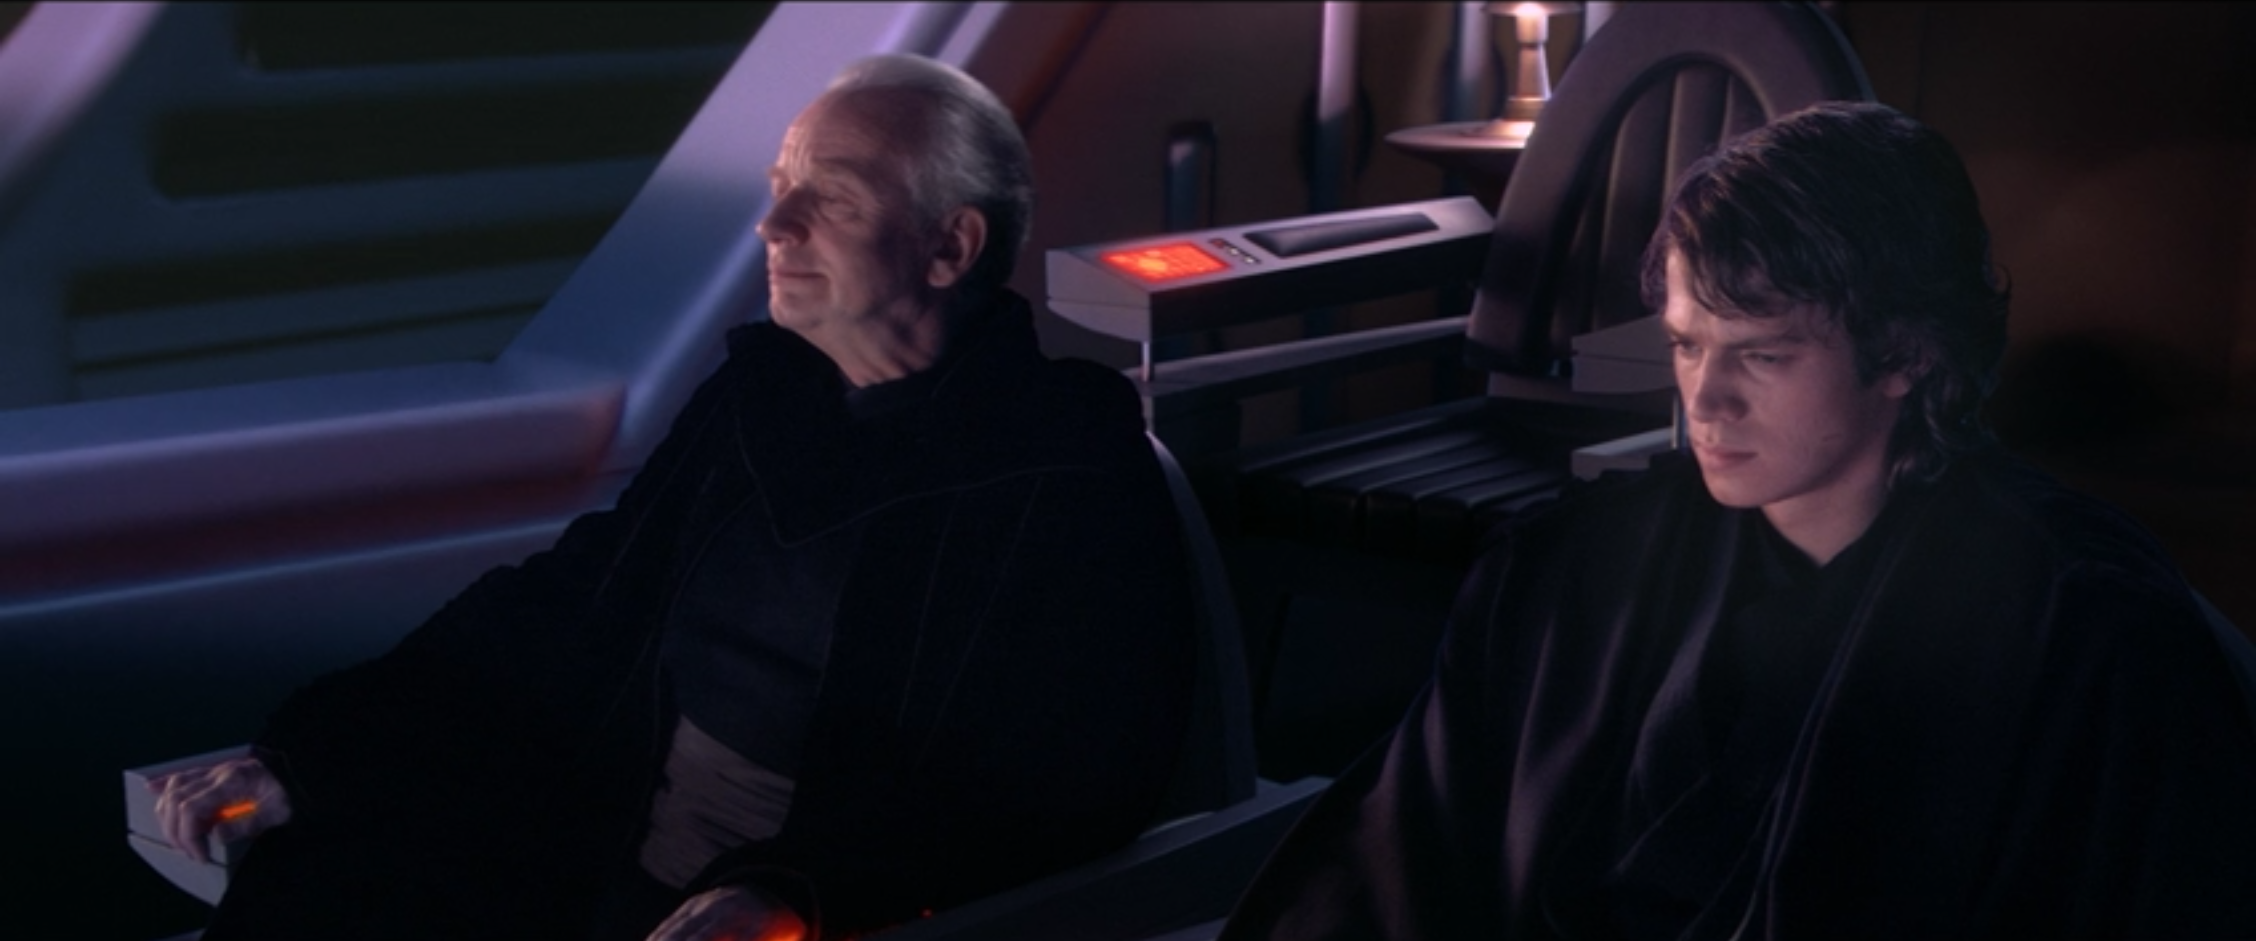 Have you ever heard the Tragedy of Darth Plageuis the Wise Blank Meme Template